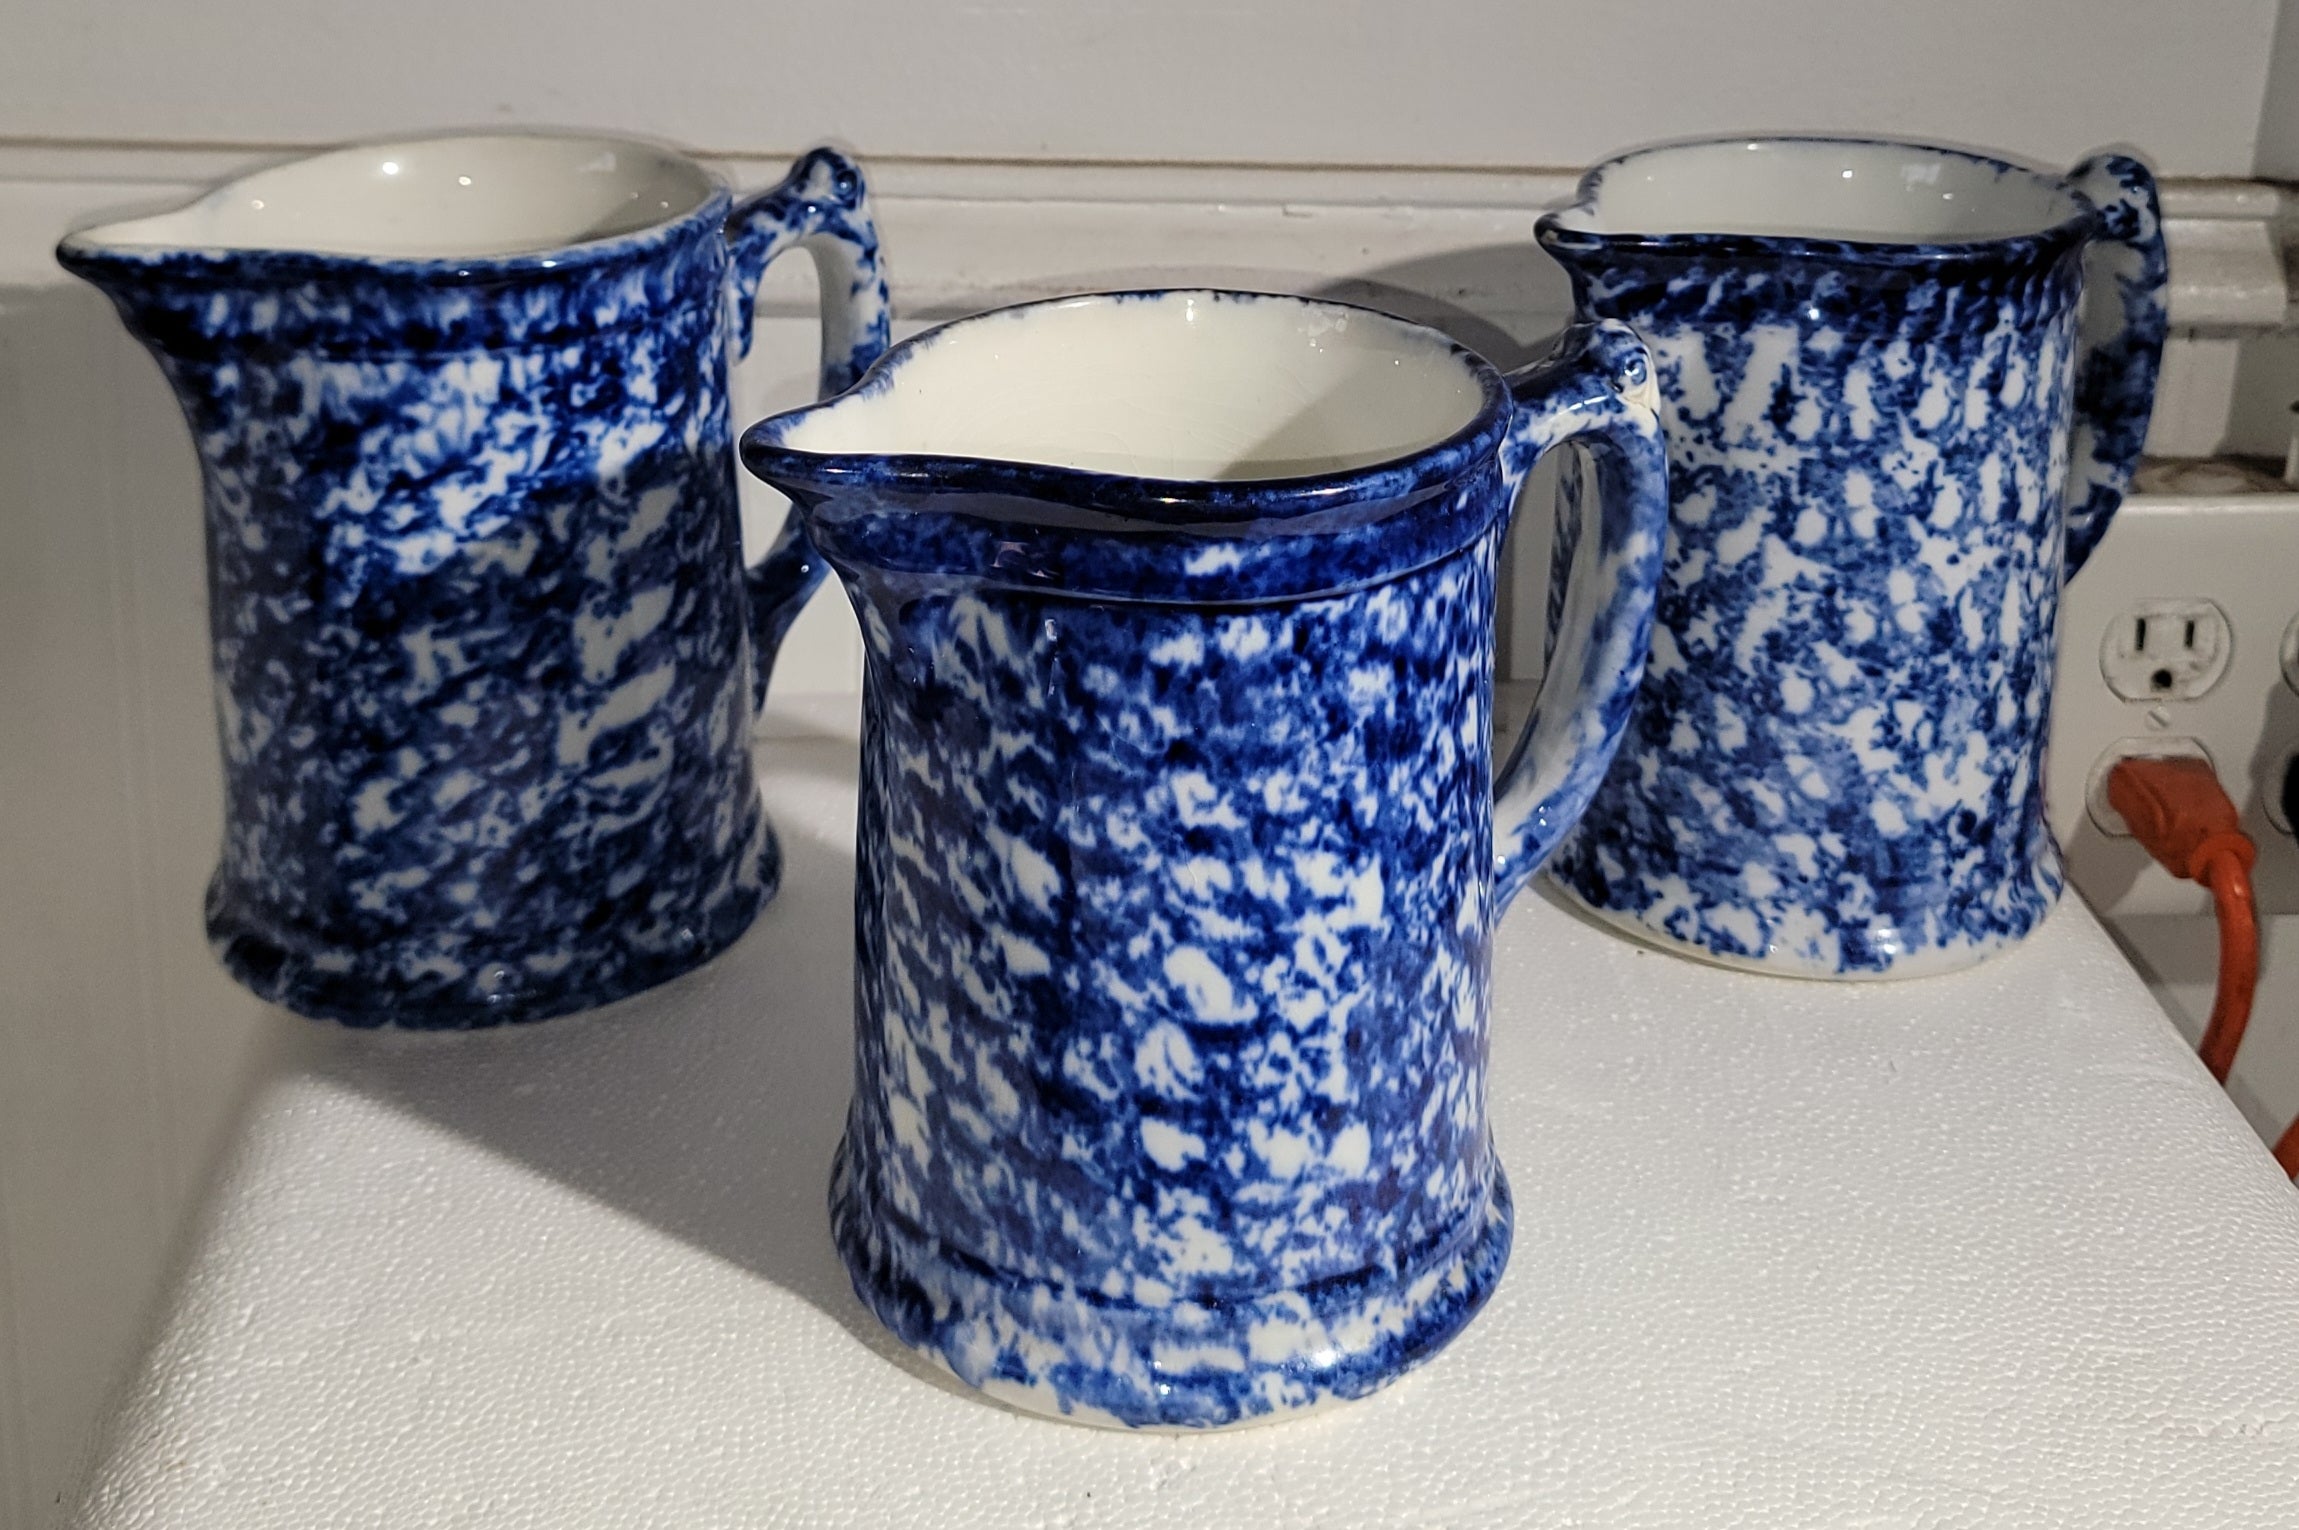 19Thc Original blue & white sponge ware pottery pitchers in a collection of five.The condition is very good and pristine.